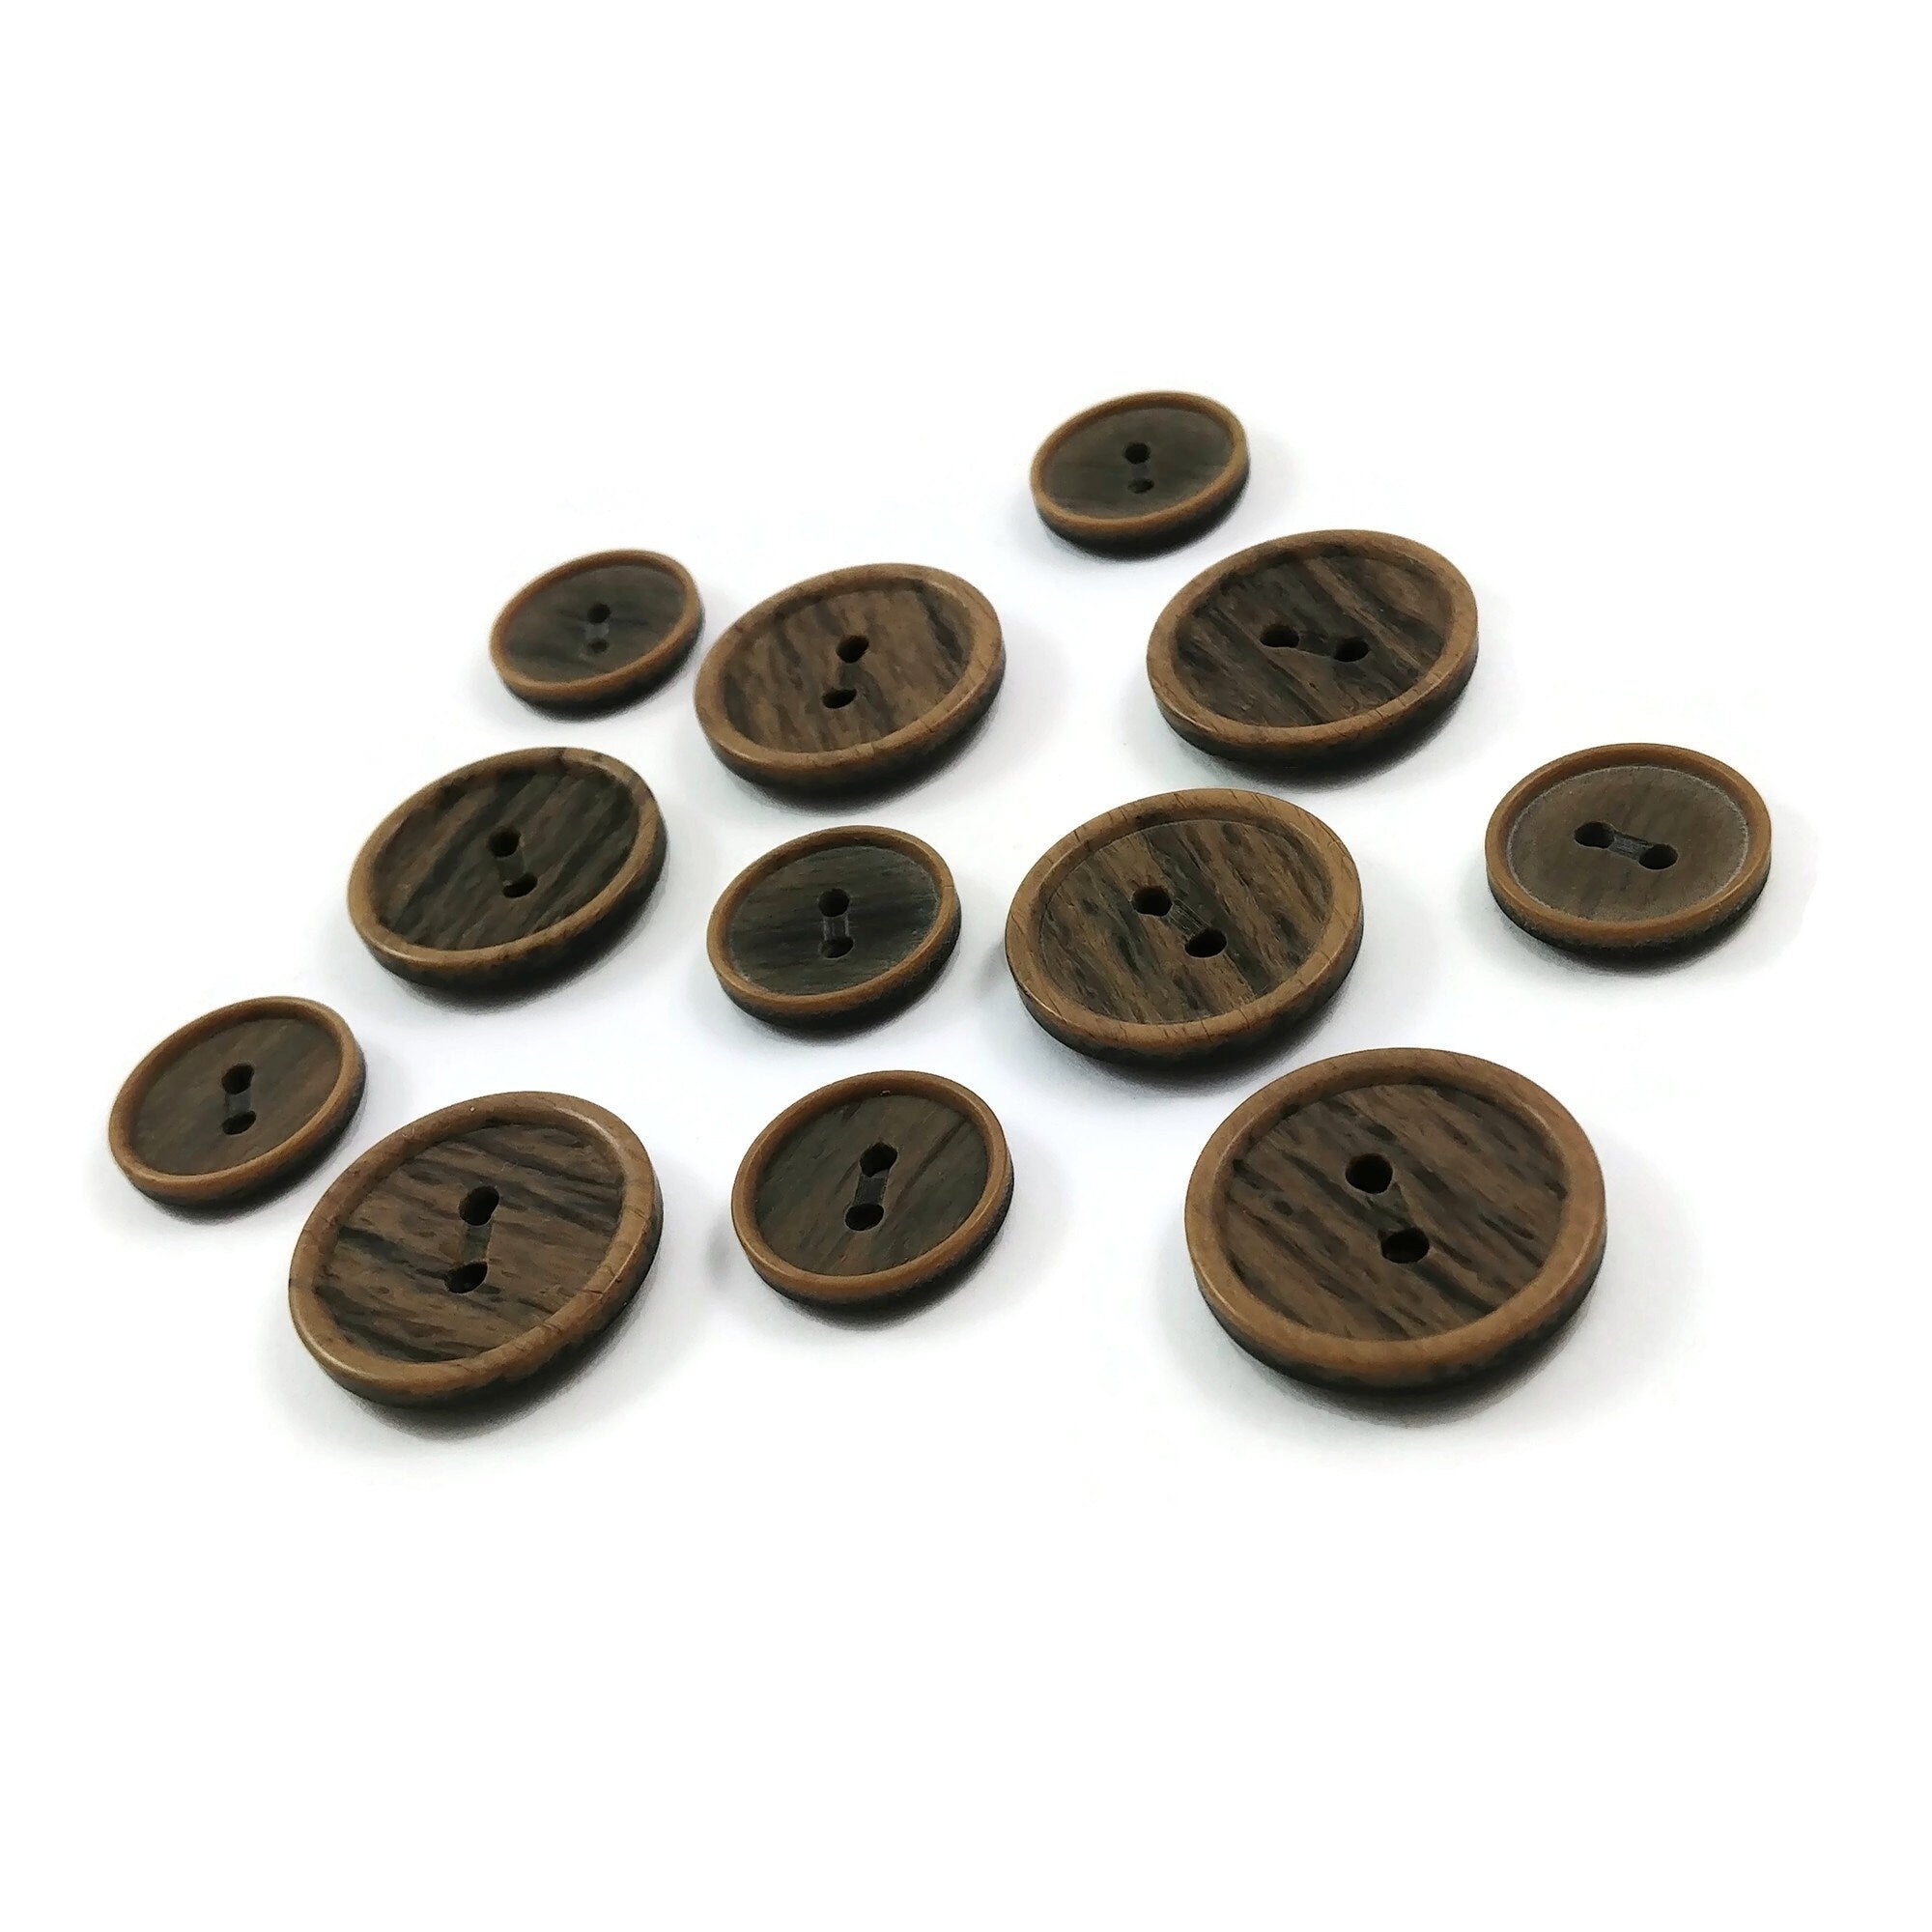 PEPPERLONELY Brand 20PC Dark Brown 4 Hole Scrapbooking Sewing Wood Buttons  35mm(1-3/8 Inch)